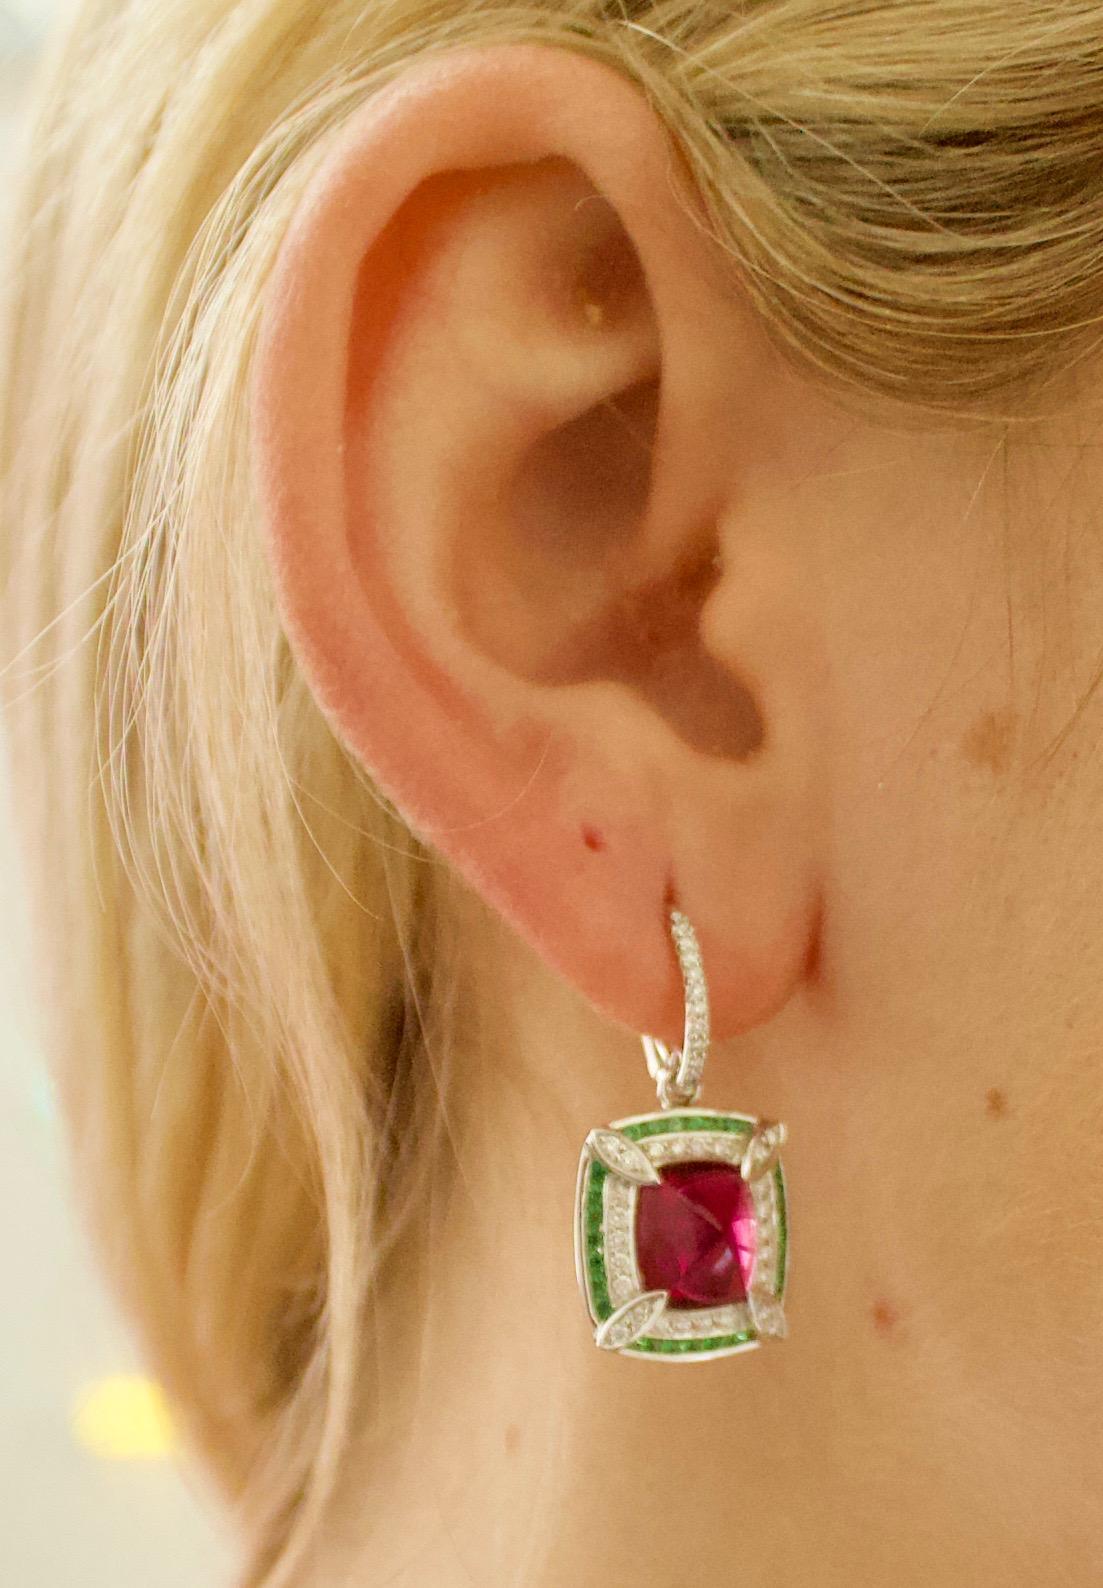 Lovely Dangling Rubellite  & Tsavorite Garnet & Diamond Earrings in 18k Gold
Two Sugar Loaf Cut Rubellites Weighing 4.60 carats
Fifty Seven Round Brilliant Cut Tsavorite Garnets Weighing.53 carats
Seventy Twi Round Brilliant Cut Diamonds Weighing